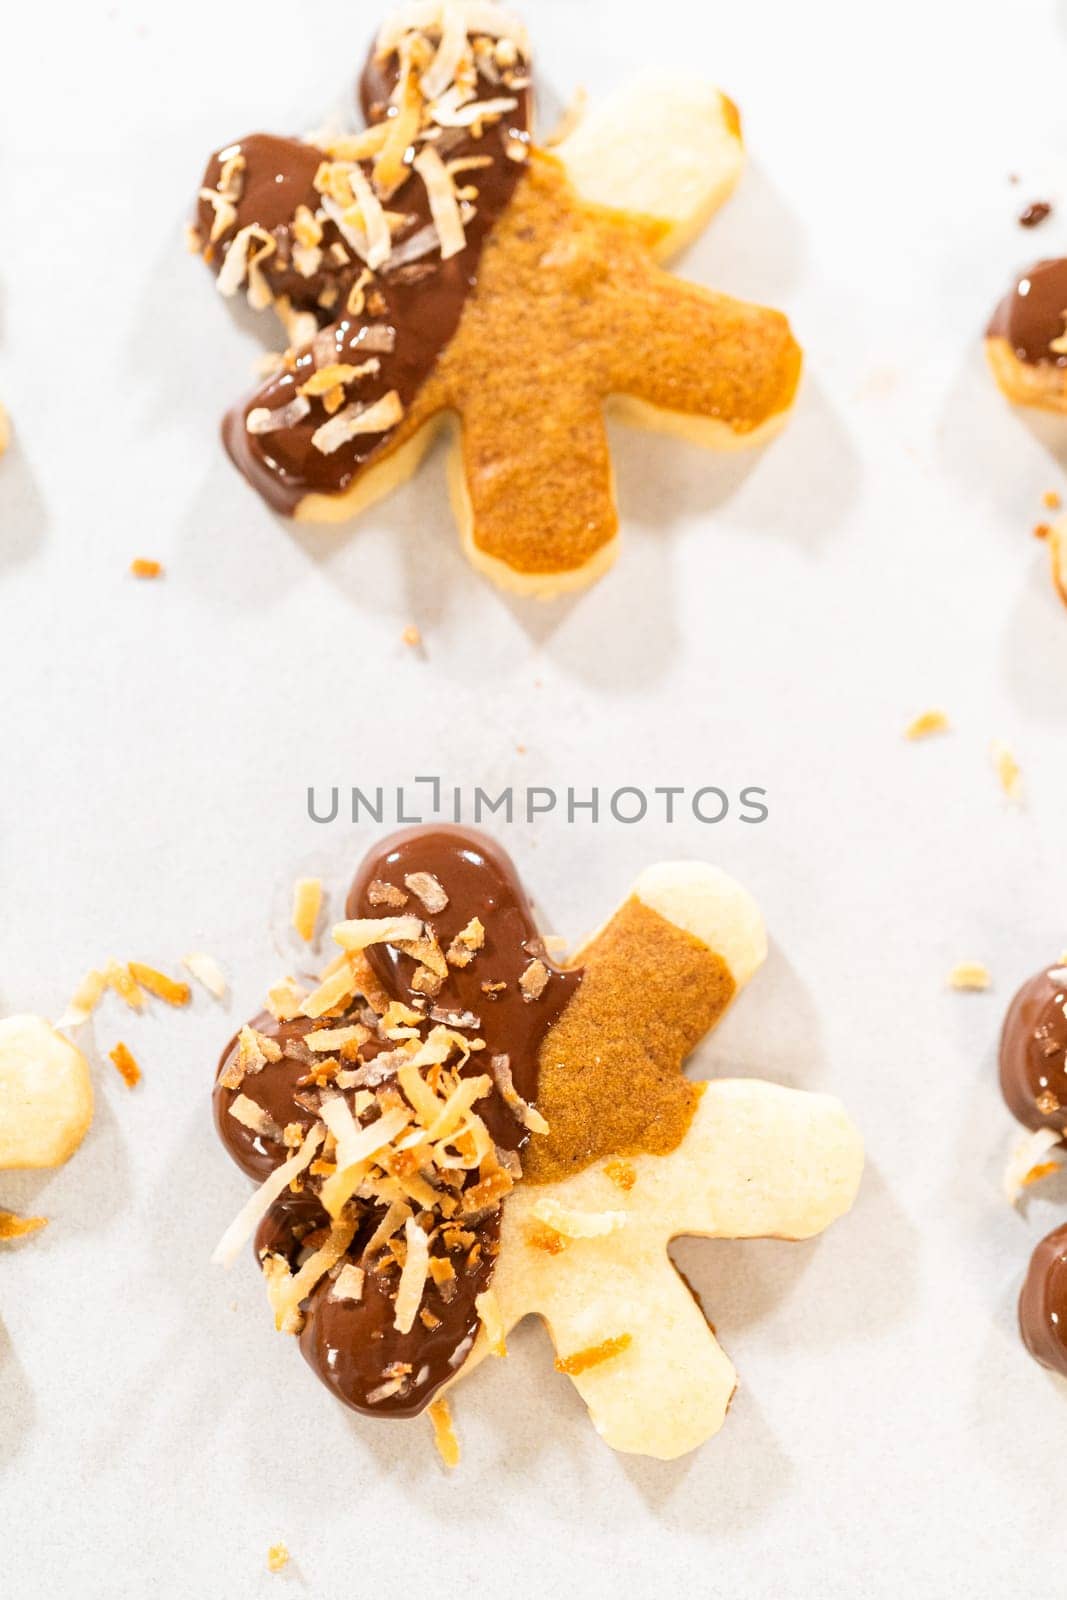 Gingerbread men cookies, chocolate-dipped feet, generously sprinkled with golden toasted coconut shavings, artfully arranged on parchment paper.